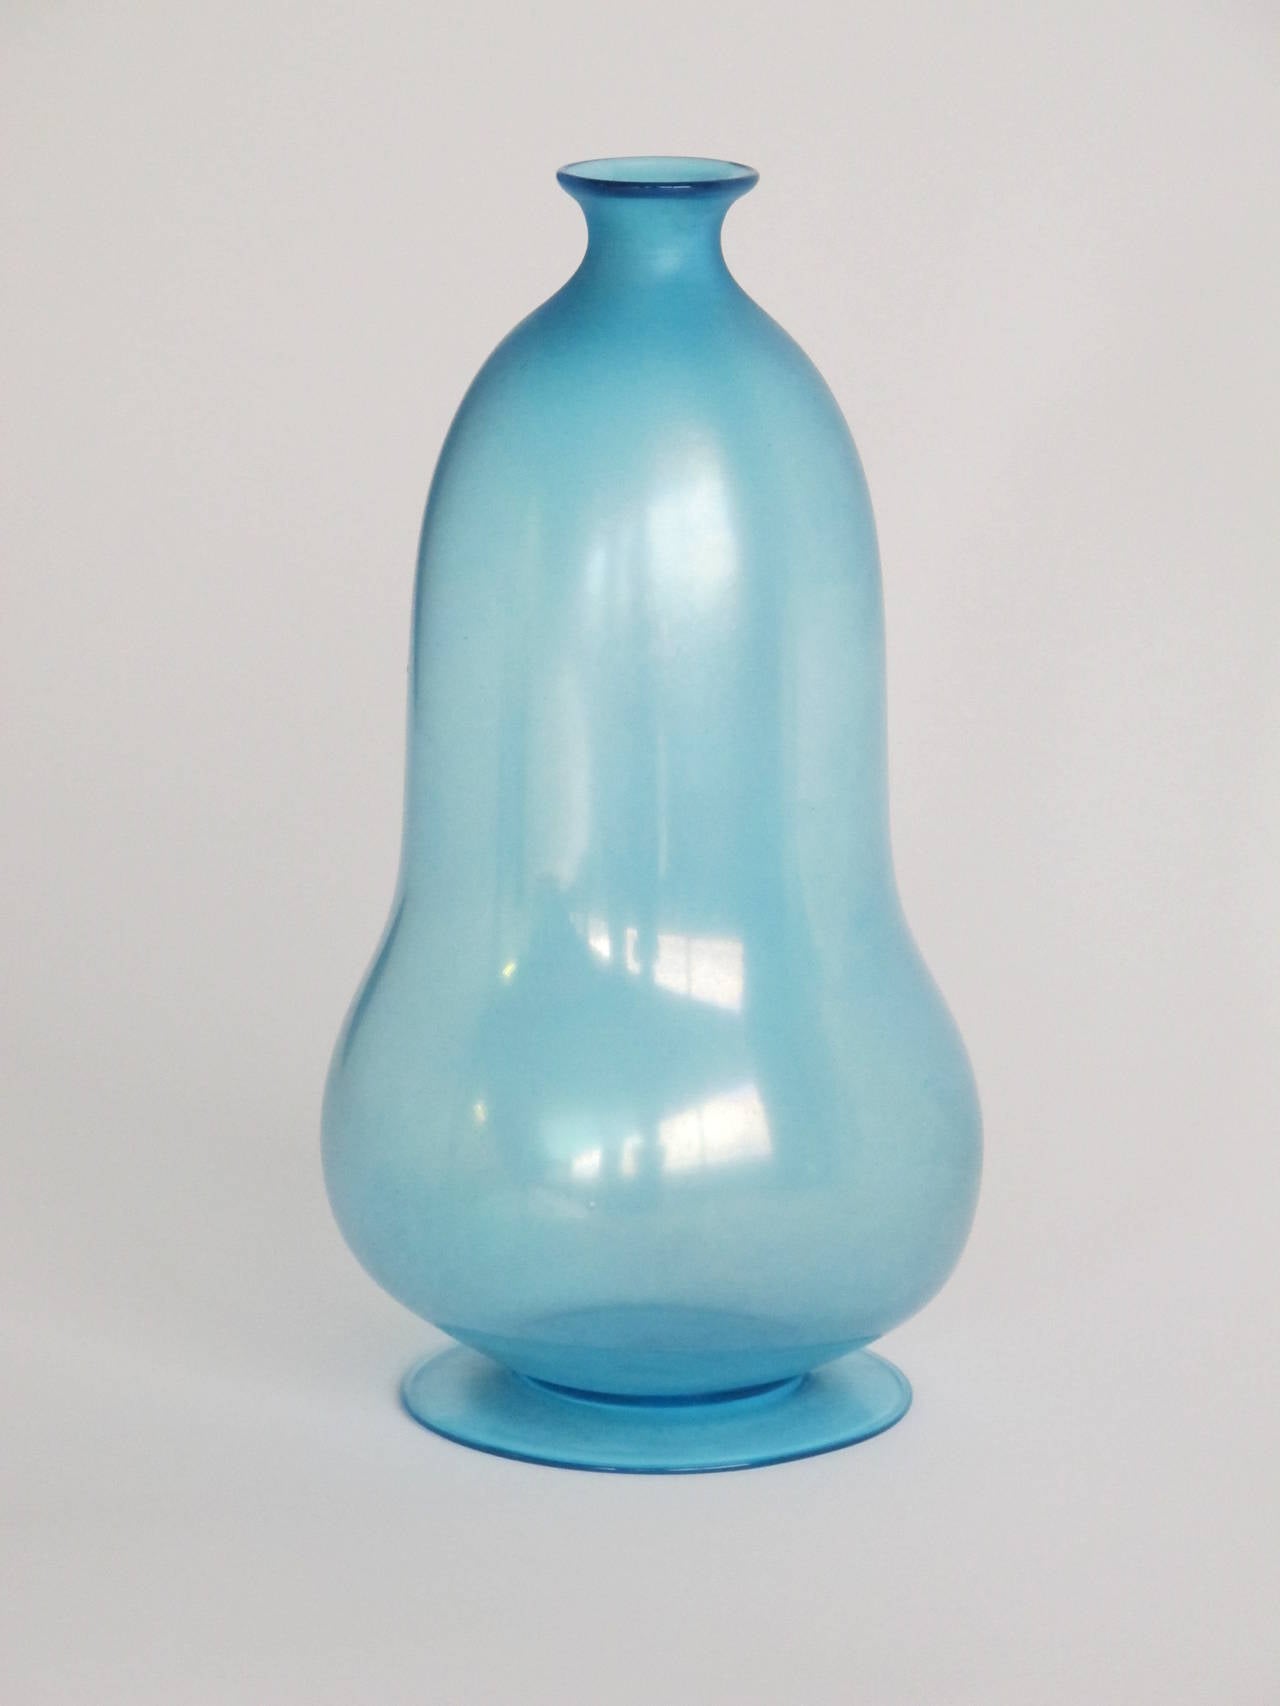 Elegant Art Deco vase from the 1920s. Early Dutch design by Andries Dirk Copier for Glasfabriek Leerdam, Thin blue blown glass with an organic Art Deco shape. Signed A.D. Copier, Leerdam Unica and numbered.